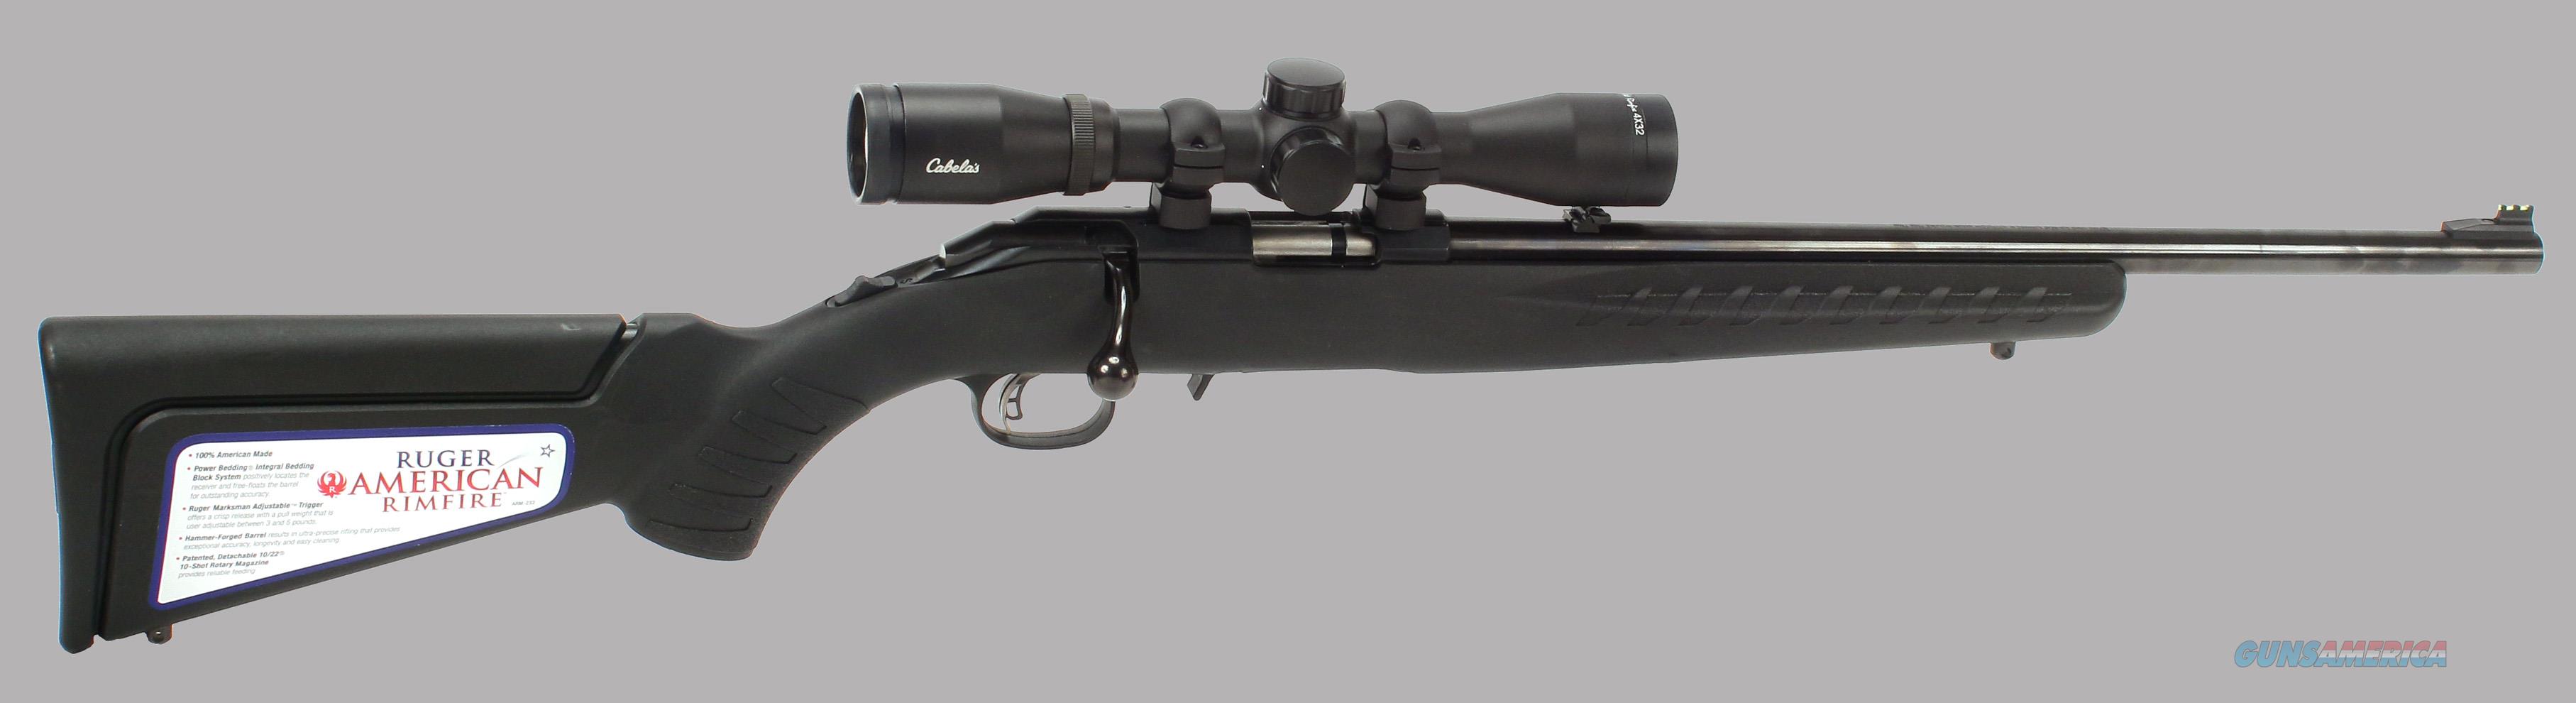 Ruger American 22 Magnum Rifle